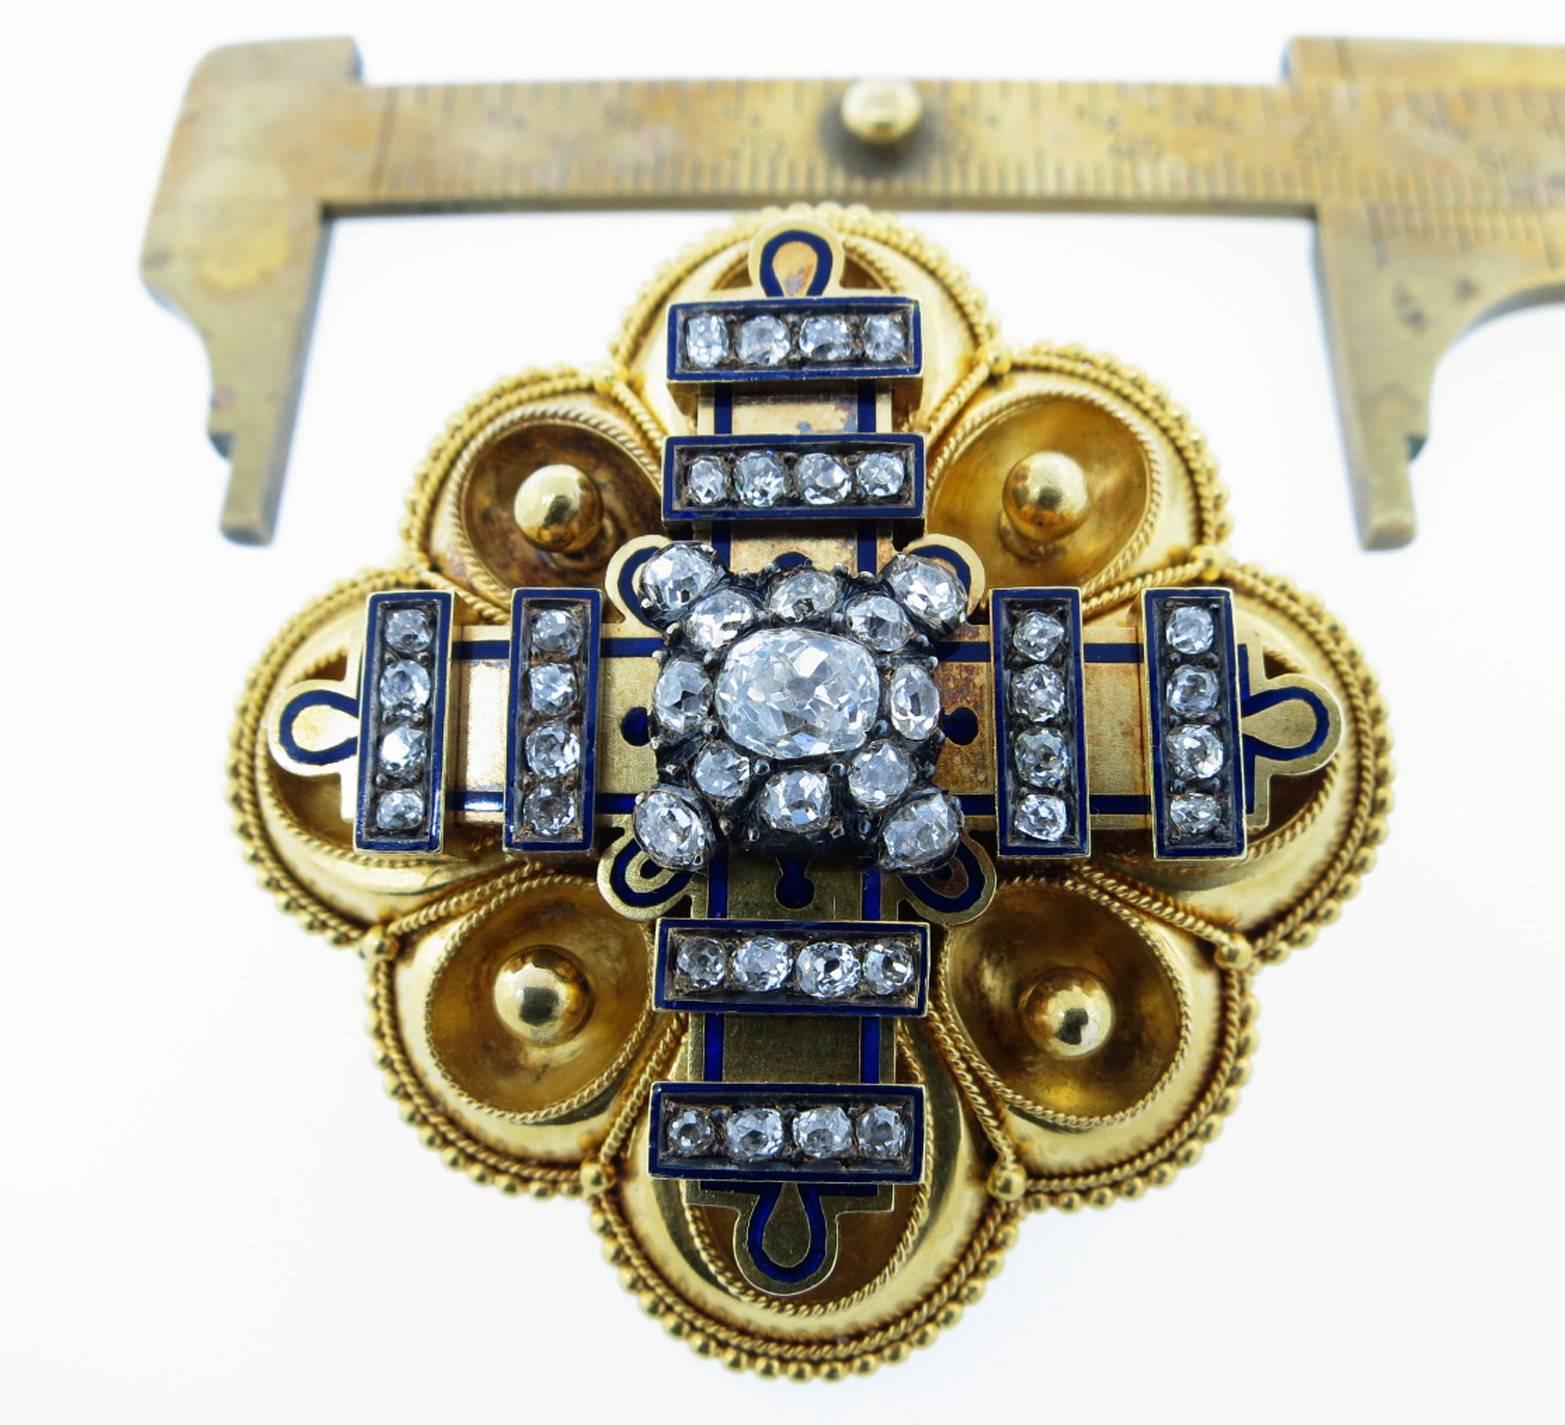 Near perfect condition Victorian brooch pendant locket measuring two inches. The center is set with a mine cut diamond weighing approx .40cts. The mount is bead set with 54 old rose cut diamonds with cobalt enamel detail Circa 1880.